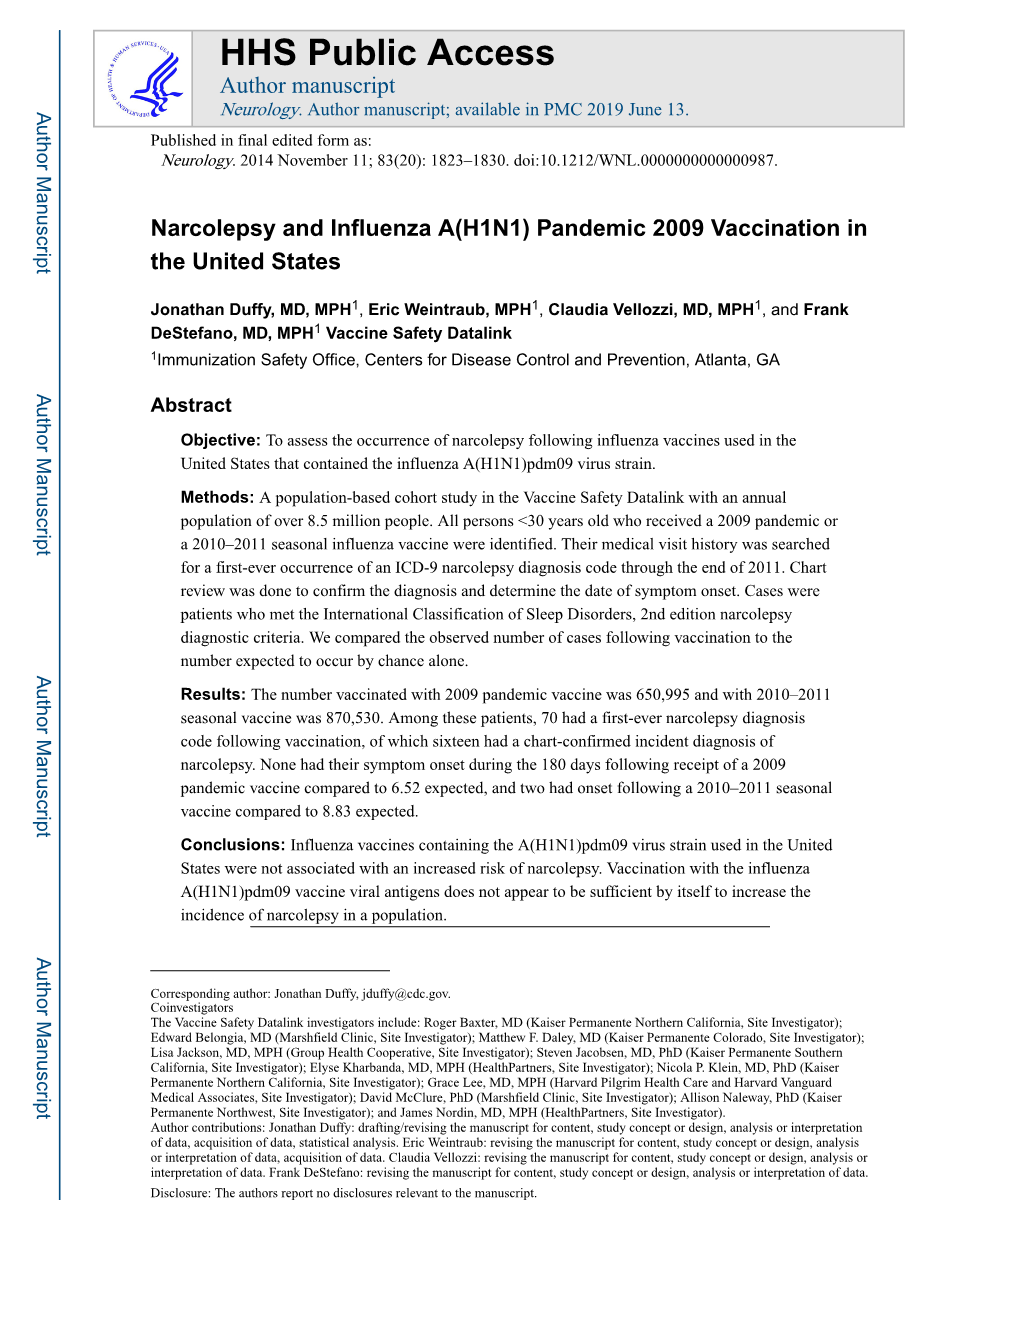 Narcolepsy and Influenza A(H1N1) Pandemic 2009 Vaccination in the United States